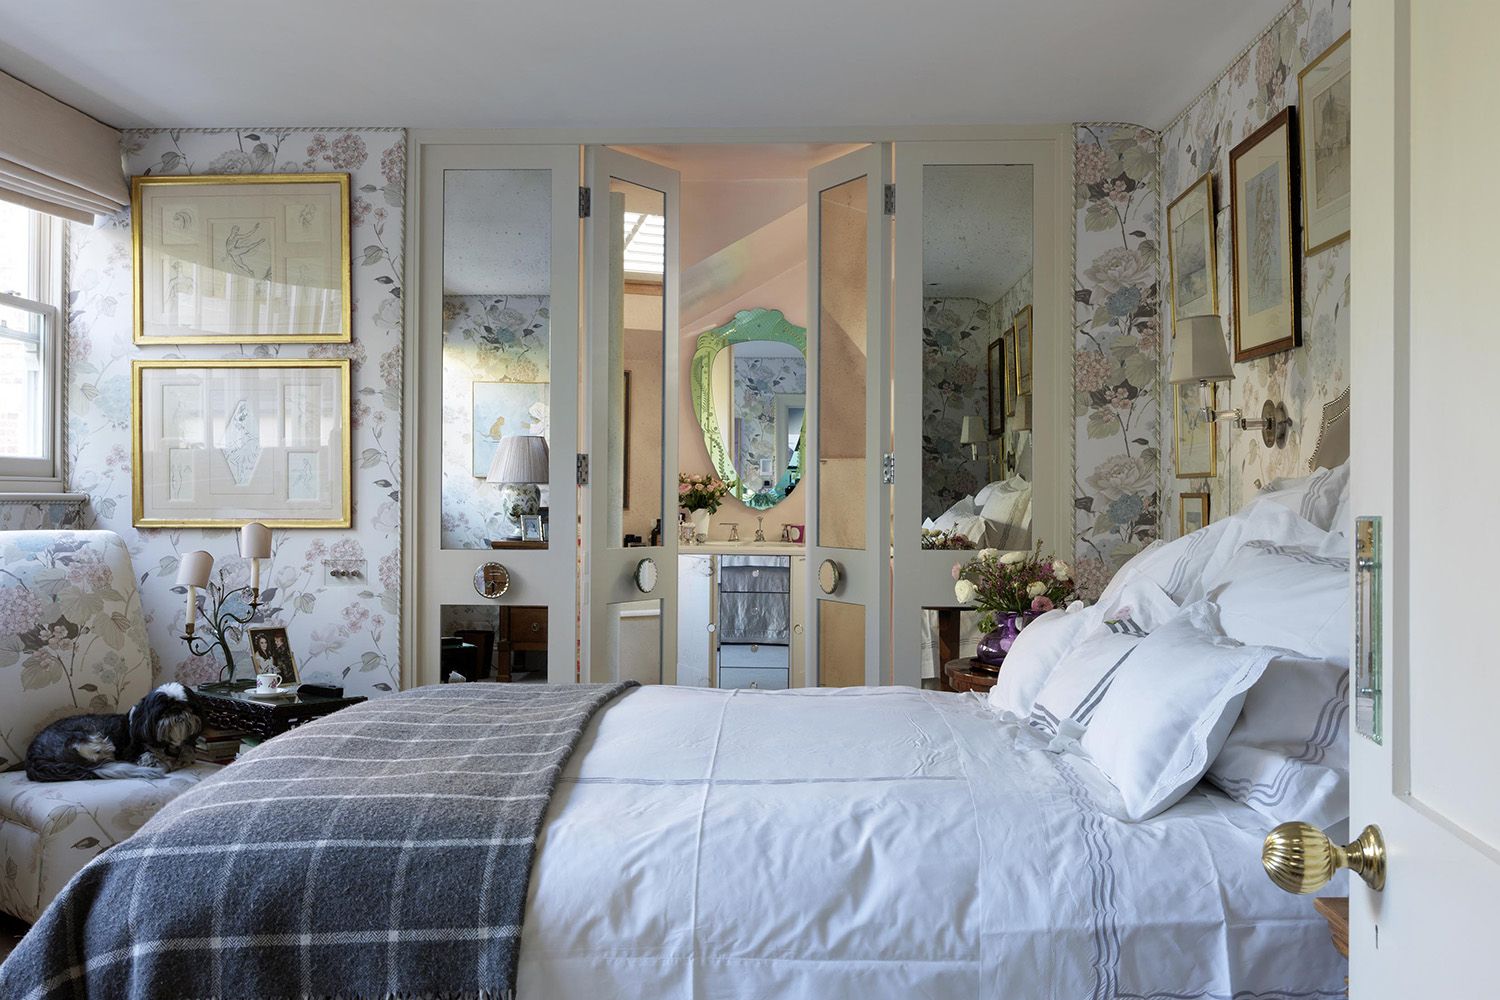 10 bedroom design mistakes to avoid – and Nina Campbell's tips on ...